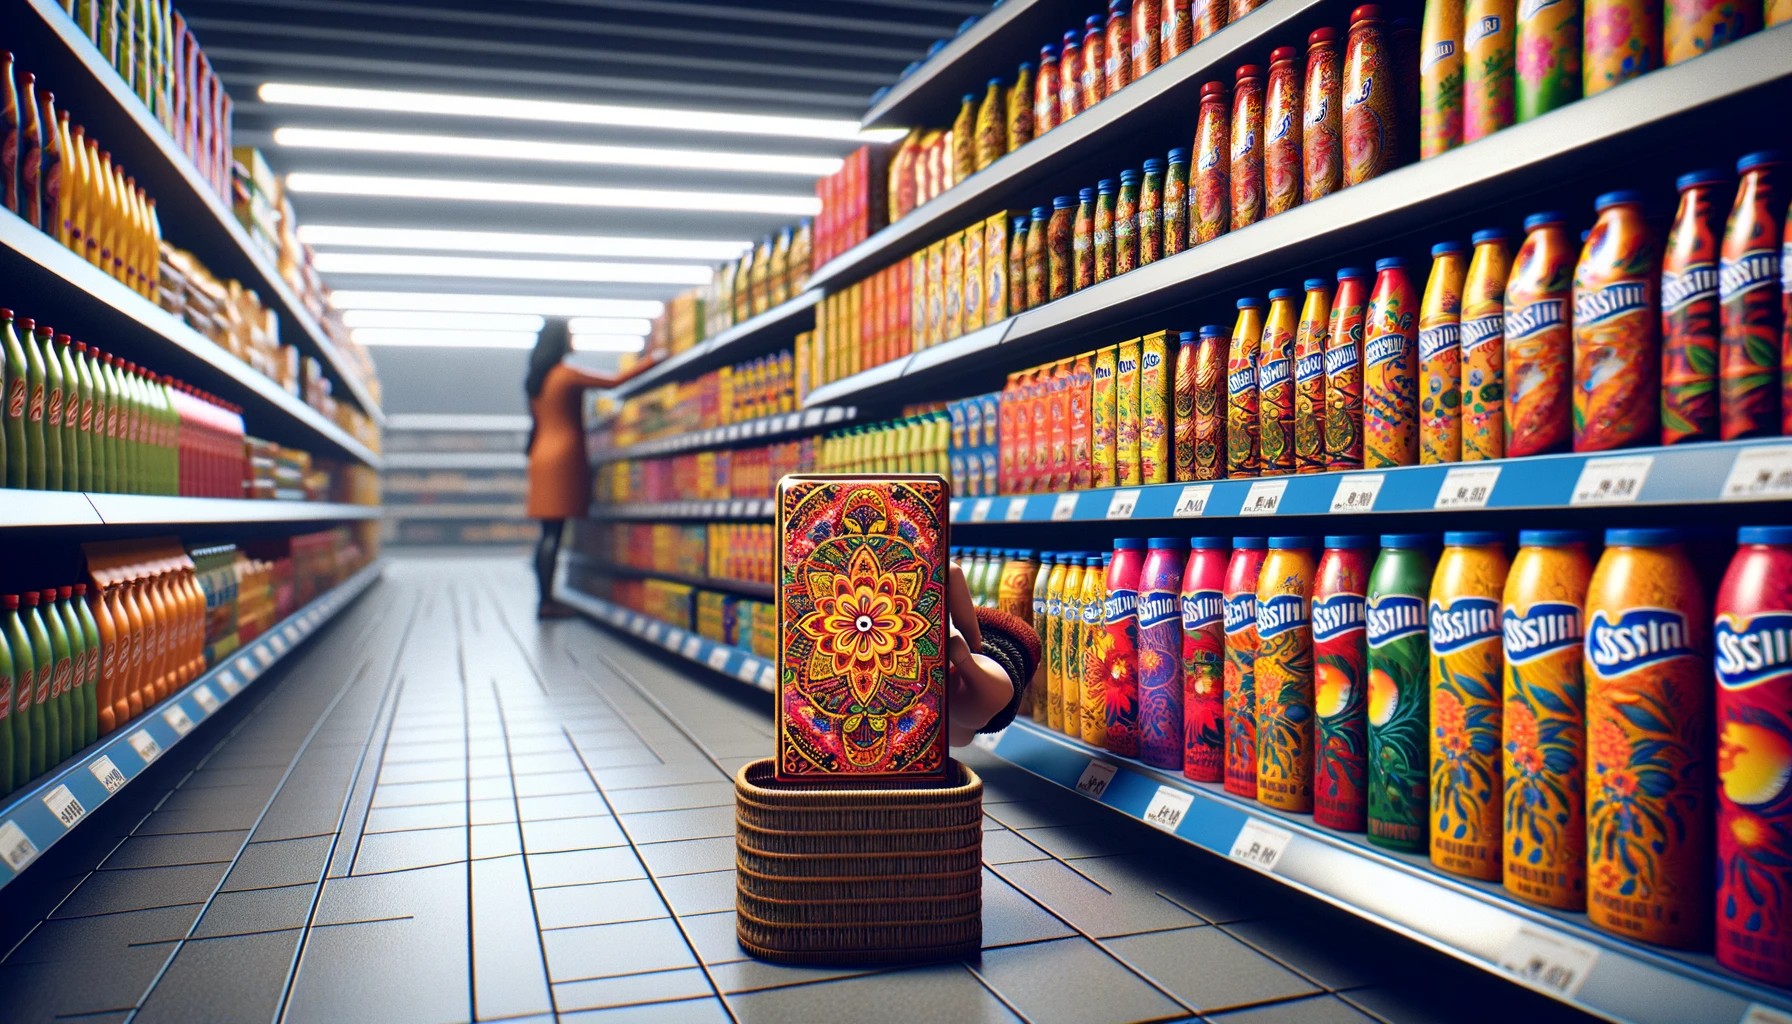 a shelf in a supermarket with various products, where one product with vibrant, culturally inspired packaging stands out prominently, drawing the attention of a consumer who is reaching out for it.